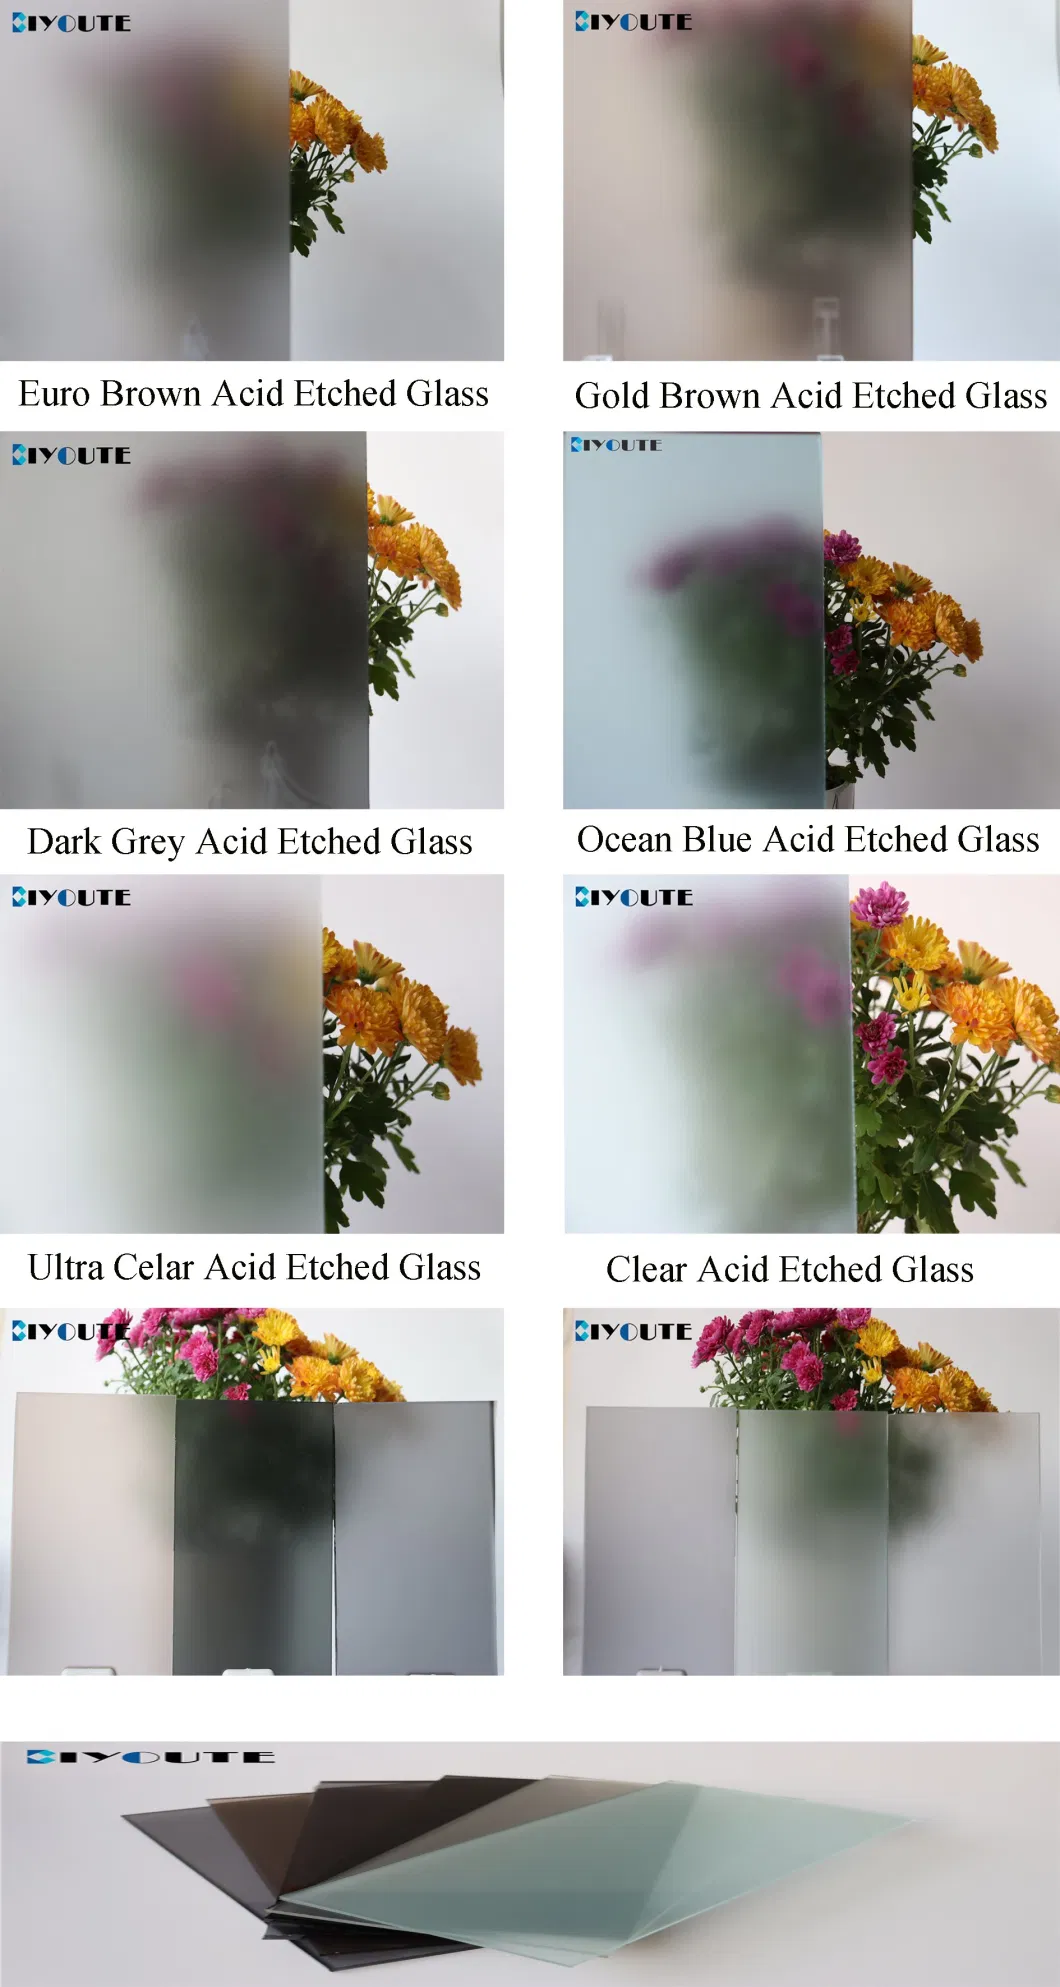 Golden Quality, Deep Clear Acid Etched Decorative Glass/ Laminated Glass